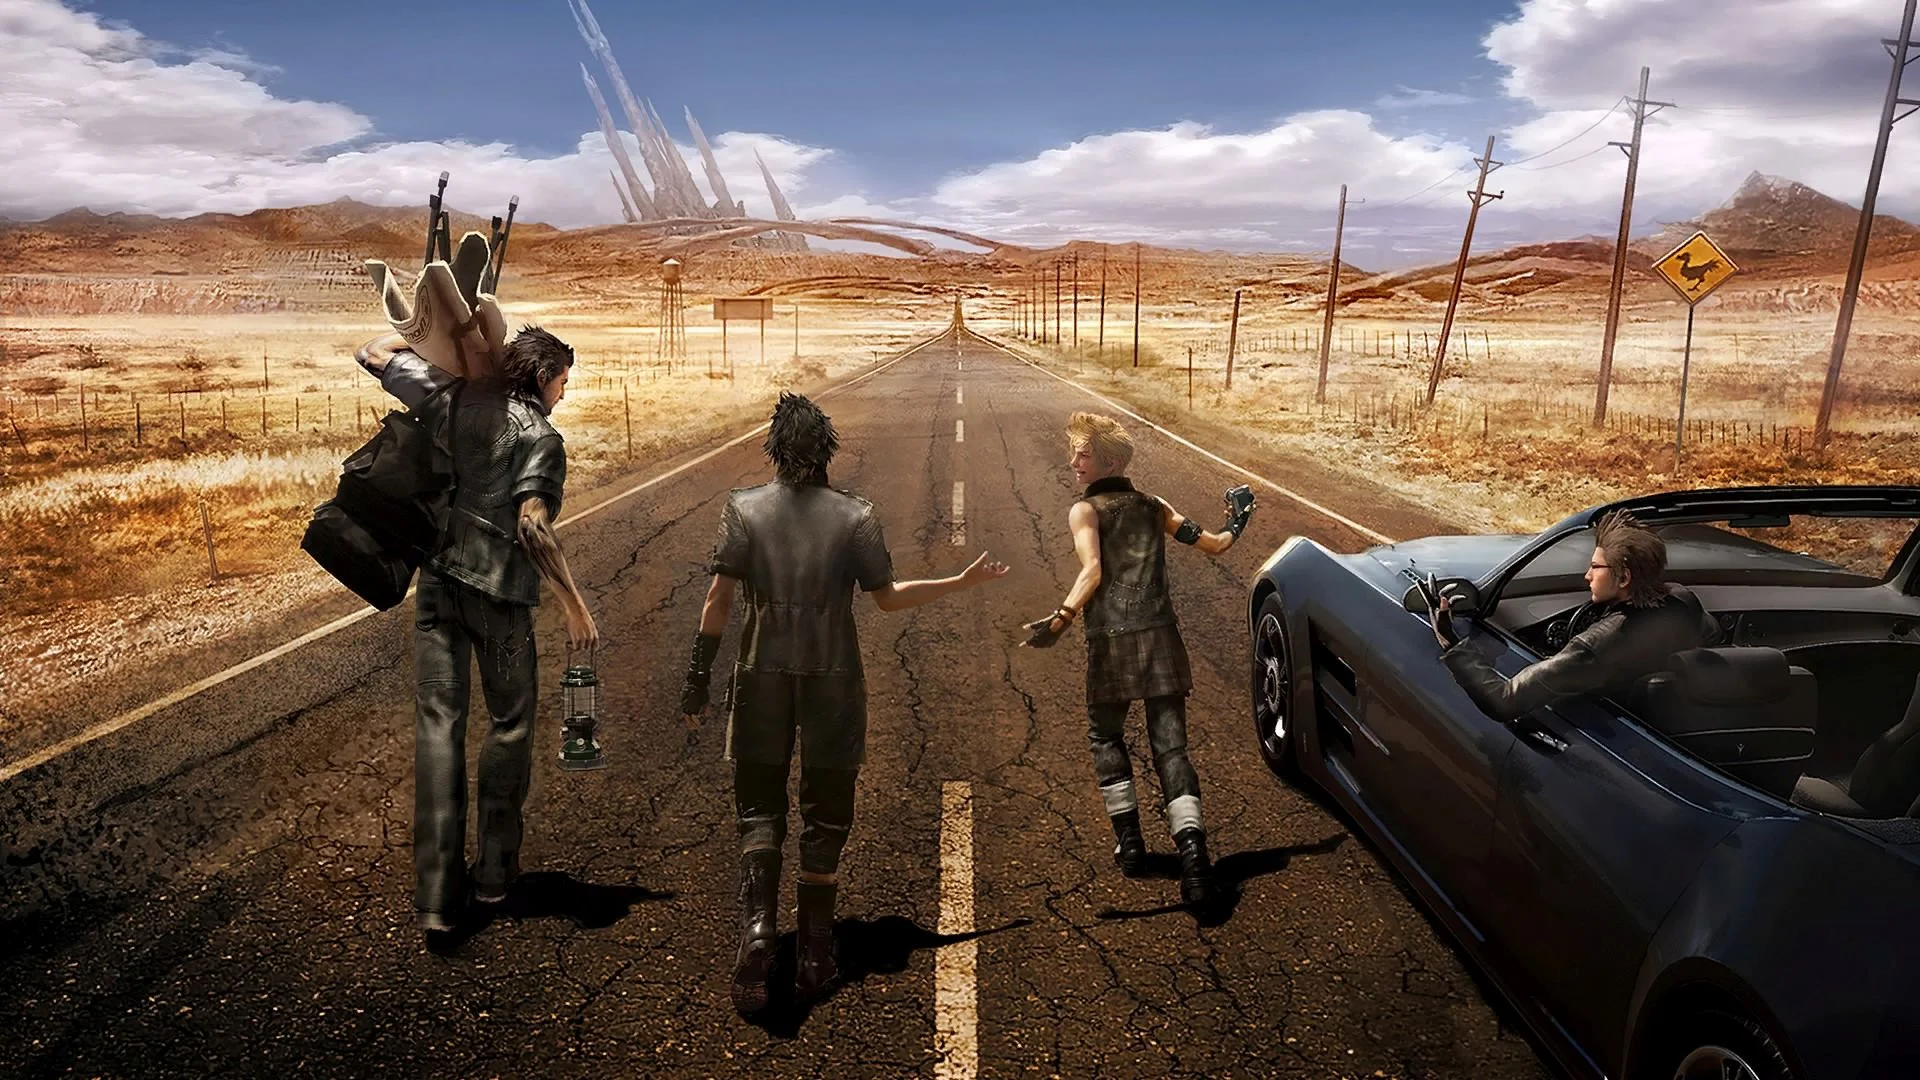 An Introduction To Final Fantasy XV Videogame